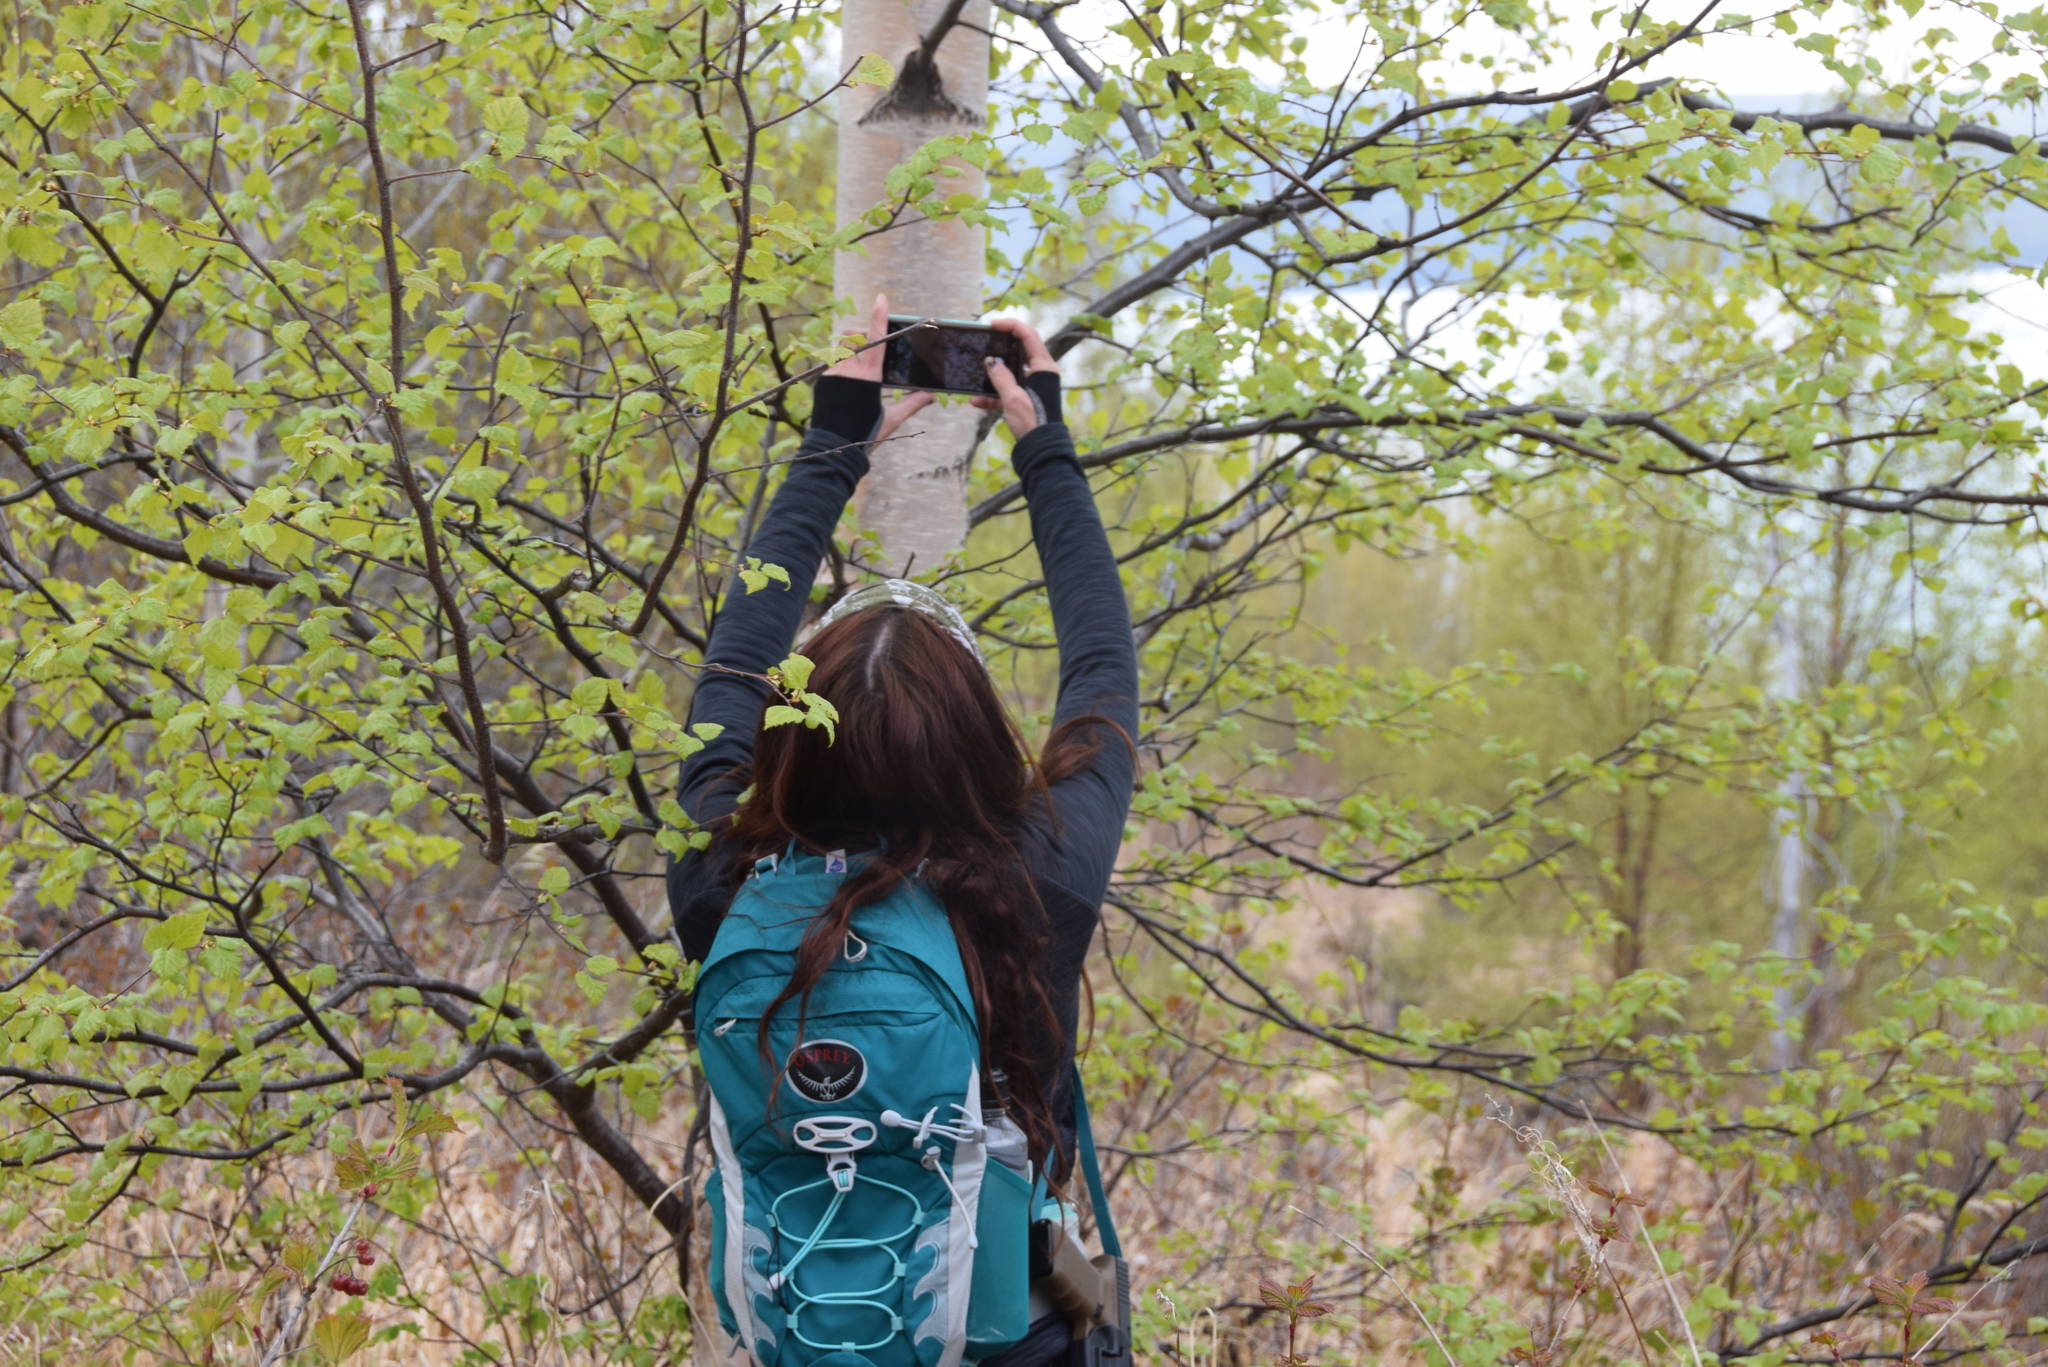 Tiffany Brand adds a photo to her personal collection while hiking the vista trail at the Upper Skilak Lake Campground in Alaska on Saturday, May 11, 2019. (Photo by Brian Mazurek/Peninsula Clarion)